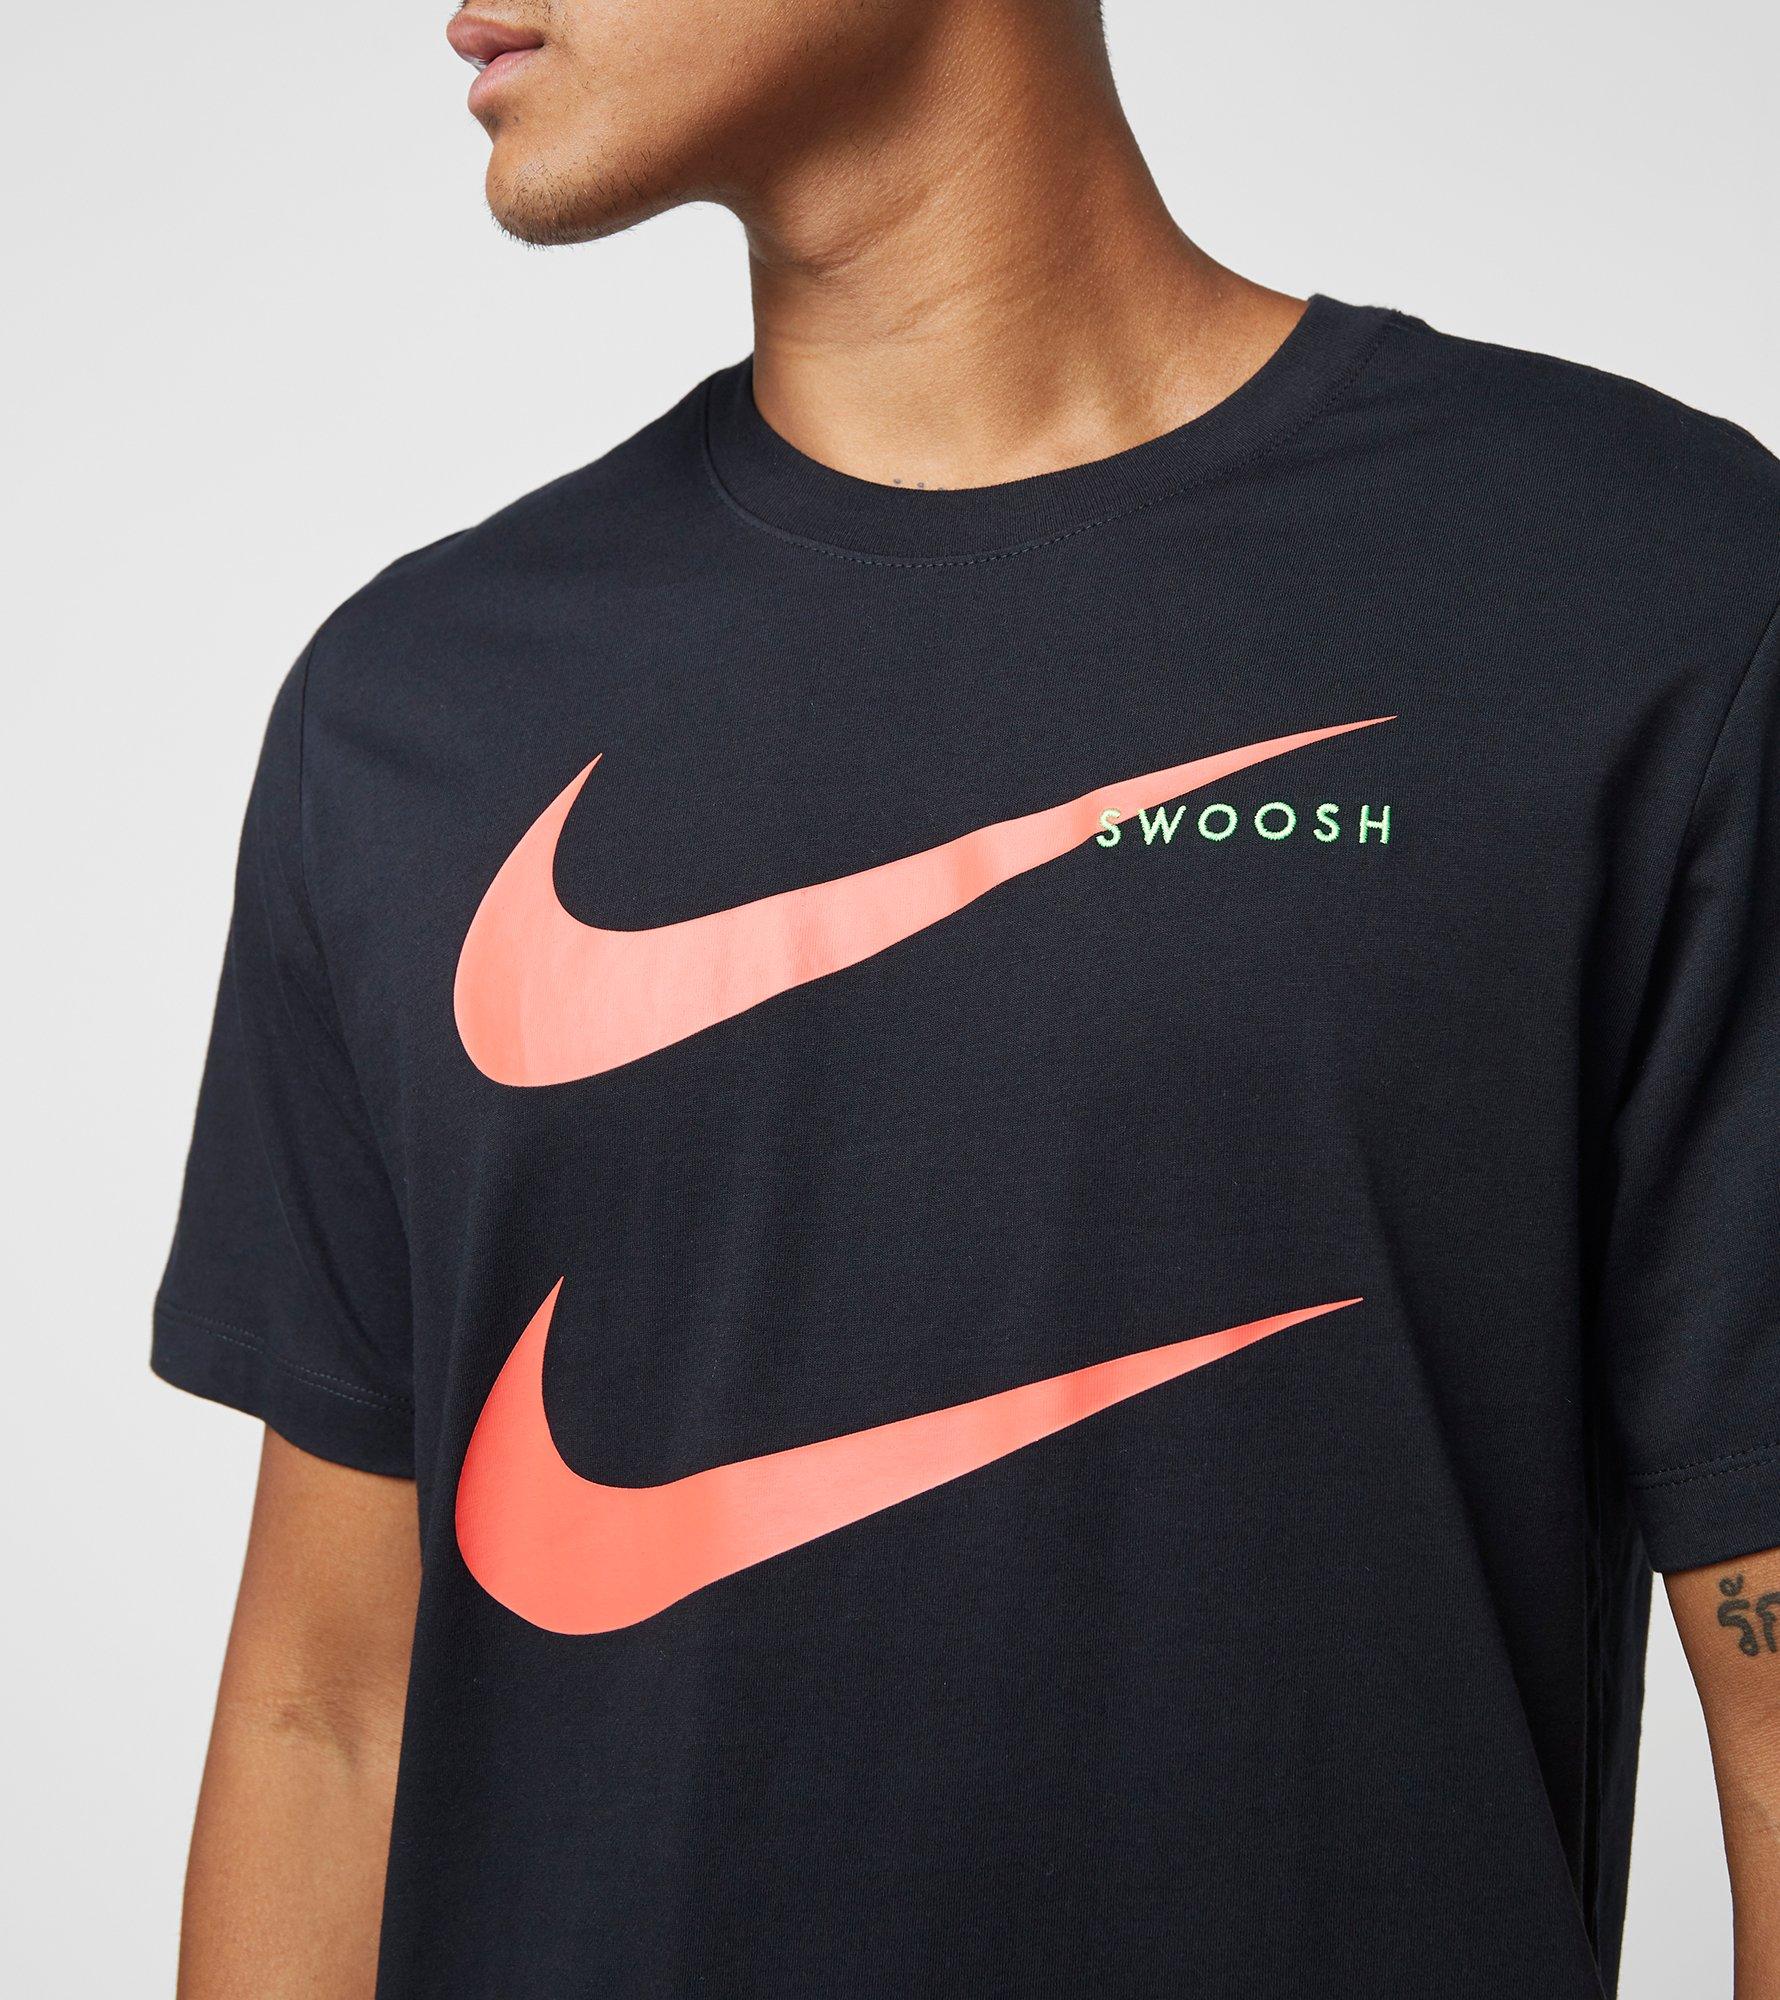 nike double swoosh meaning